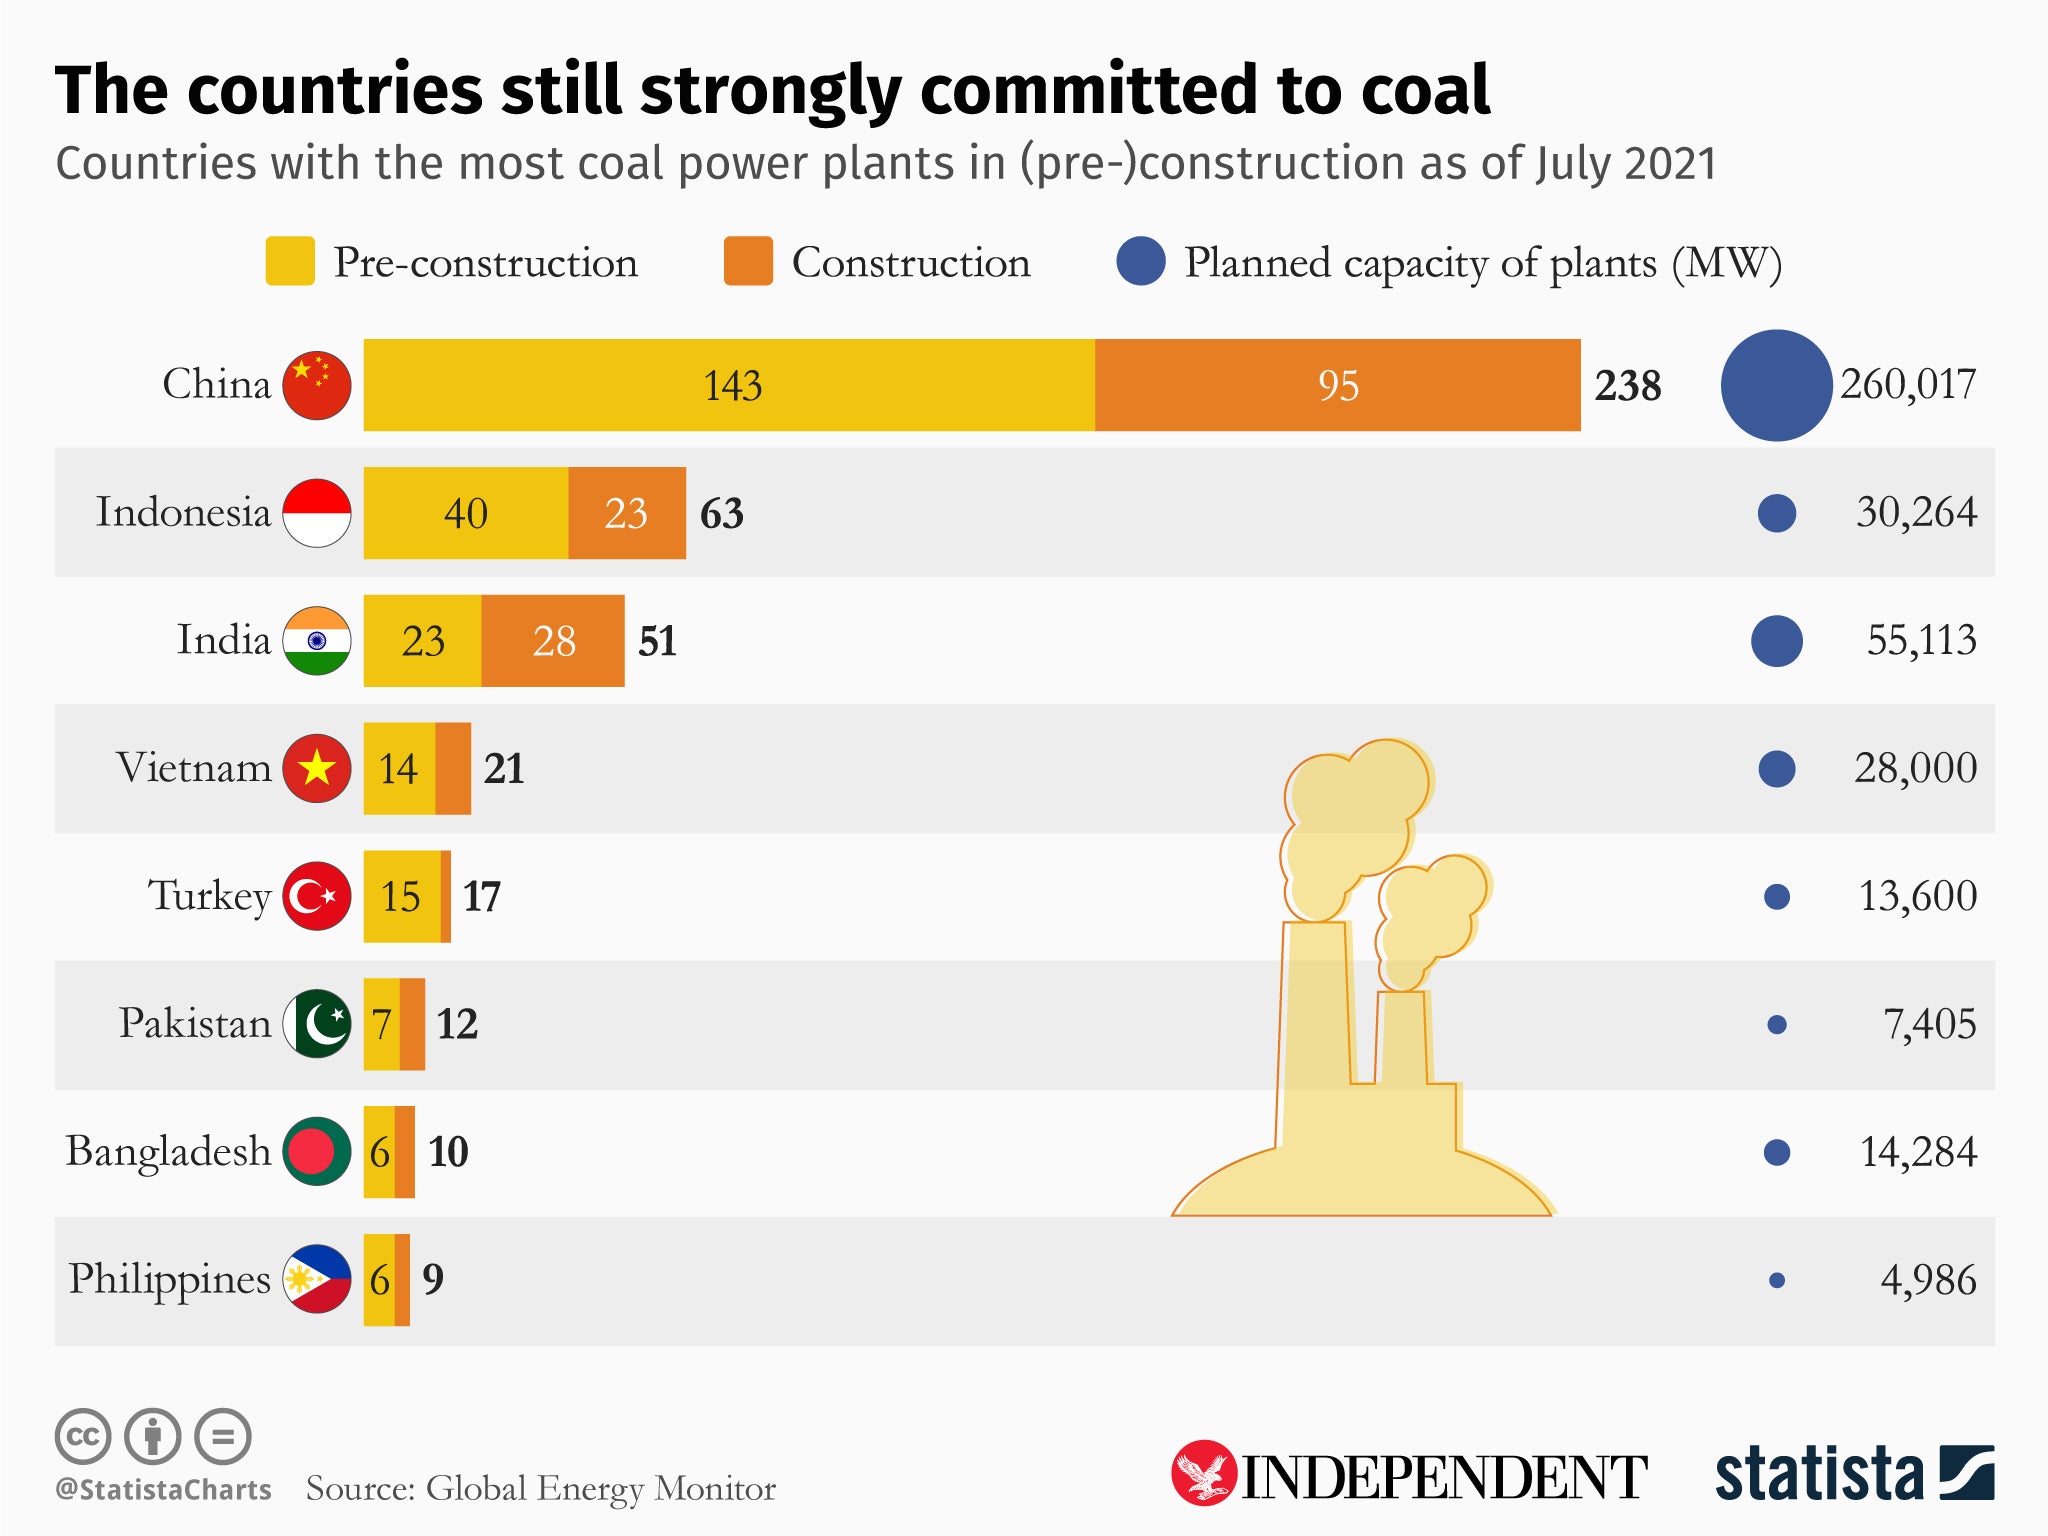 India is one the top three countries still investing in thermal coal power plants